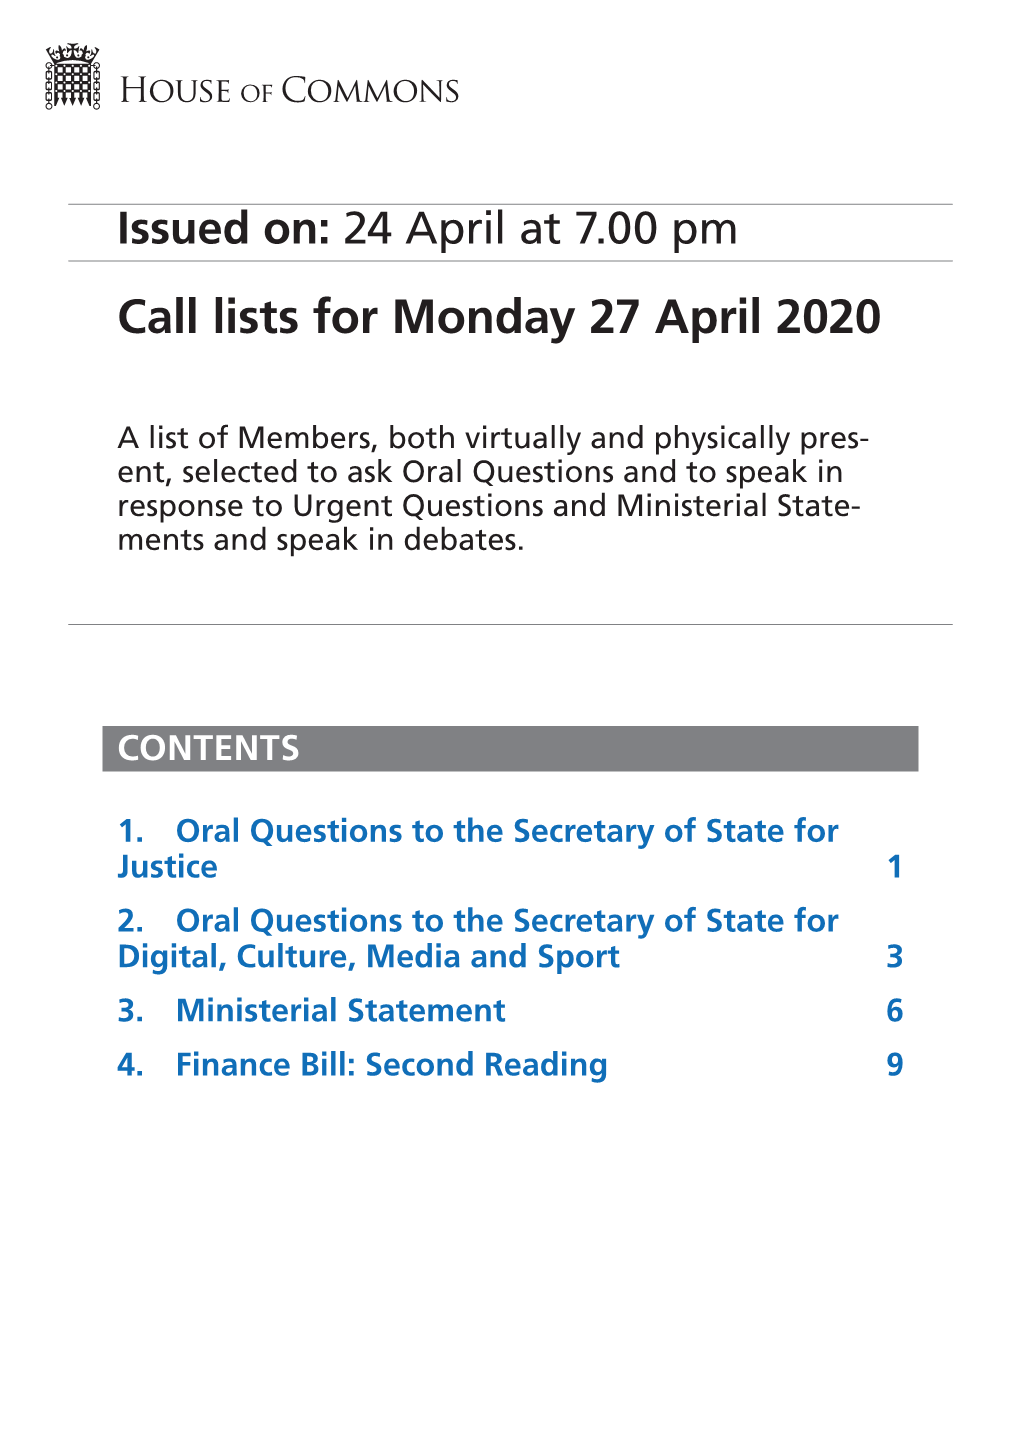 Call Lists for Monday 27 April 2020